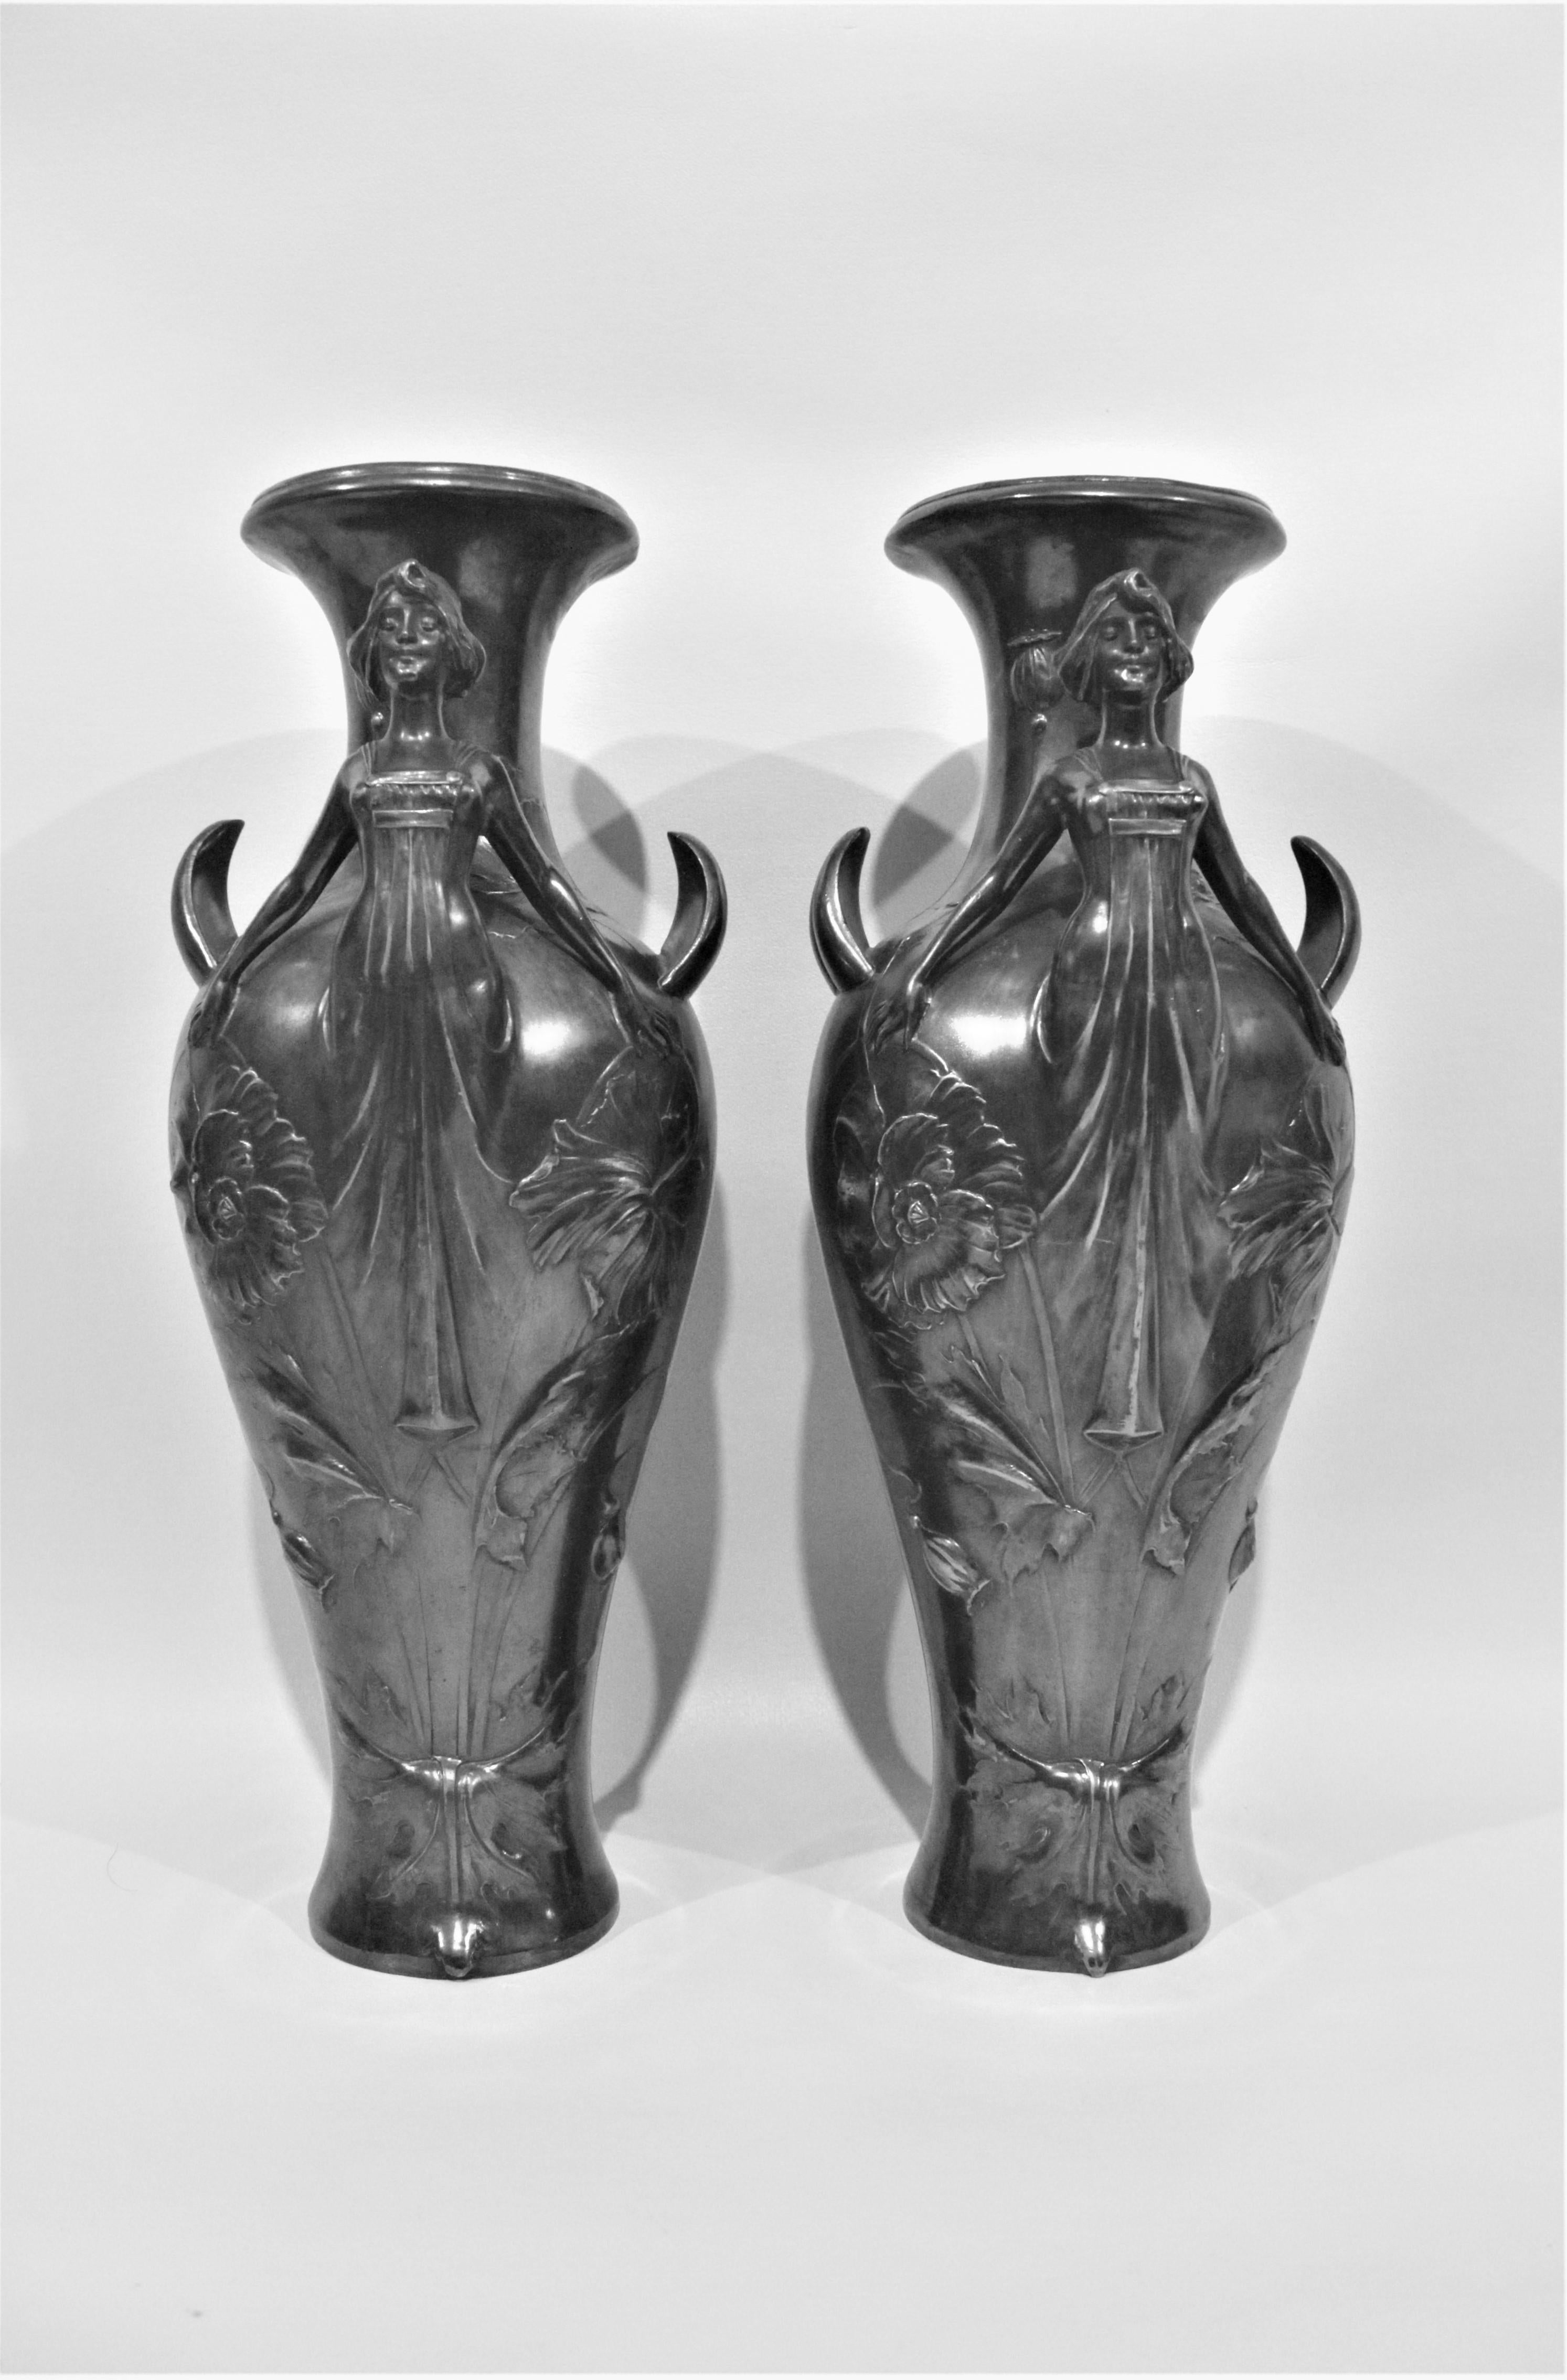 This matched pair of silver plated vases each depicting a stylized robed female with outstretched arms were mostly likely made in France, although are unmarked. The arms function as handles for the vases and the bodies of the women are quite